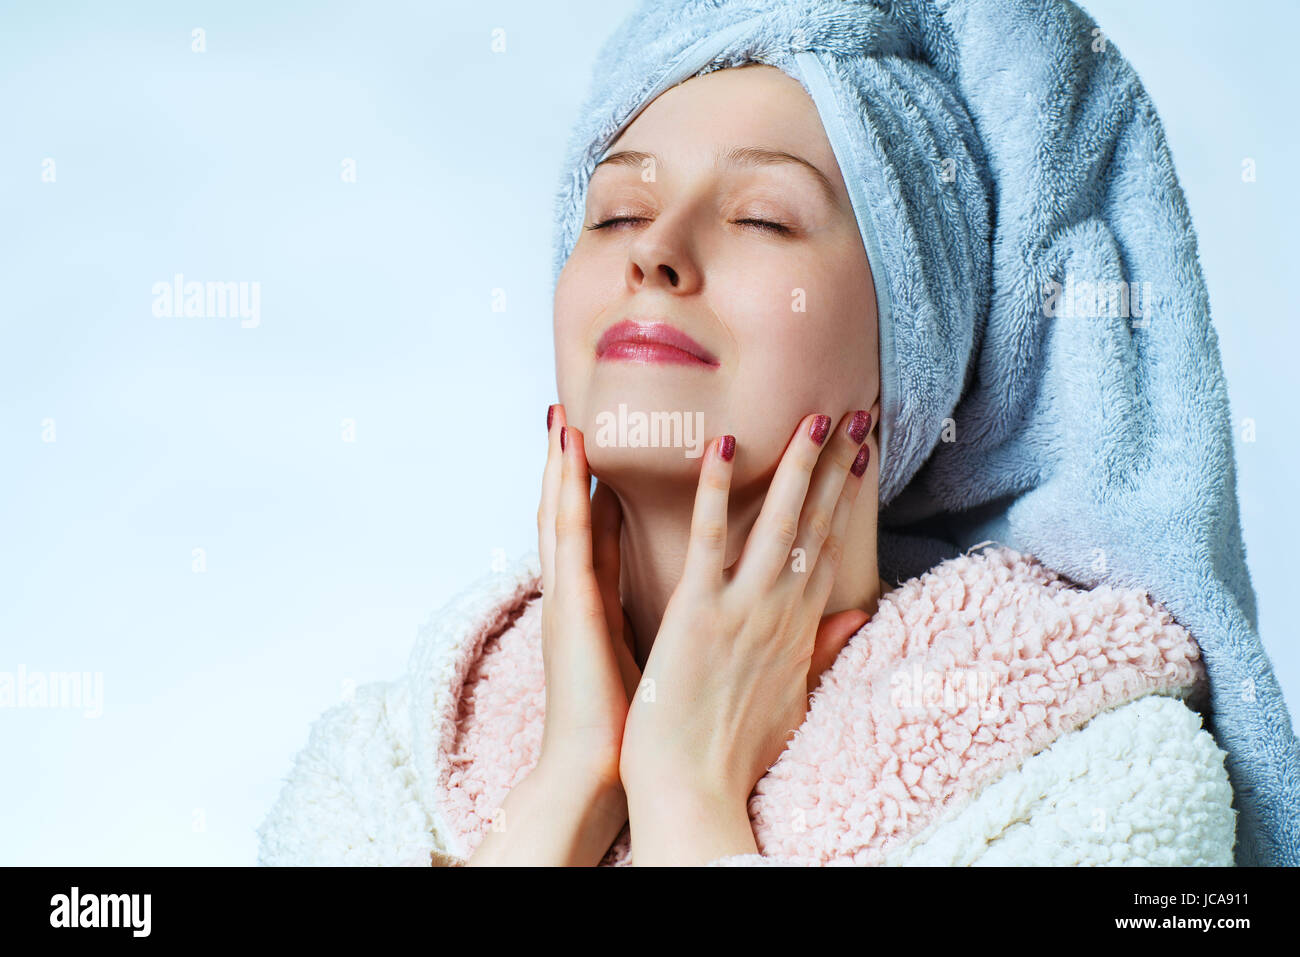 Young woman with bathrobe and towel. Beauty spa portrait. Stock Photo